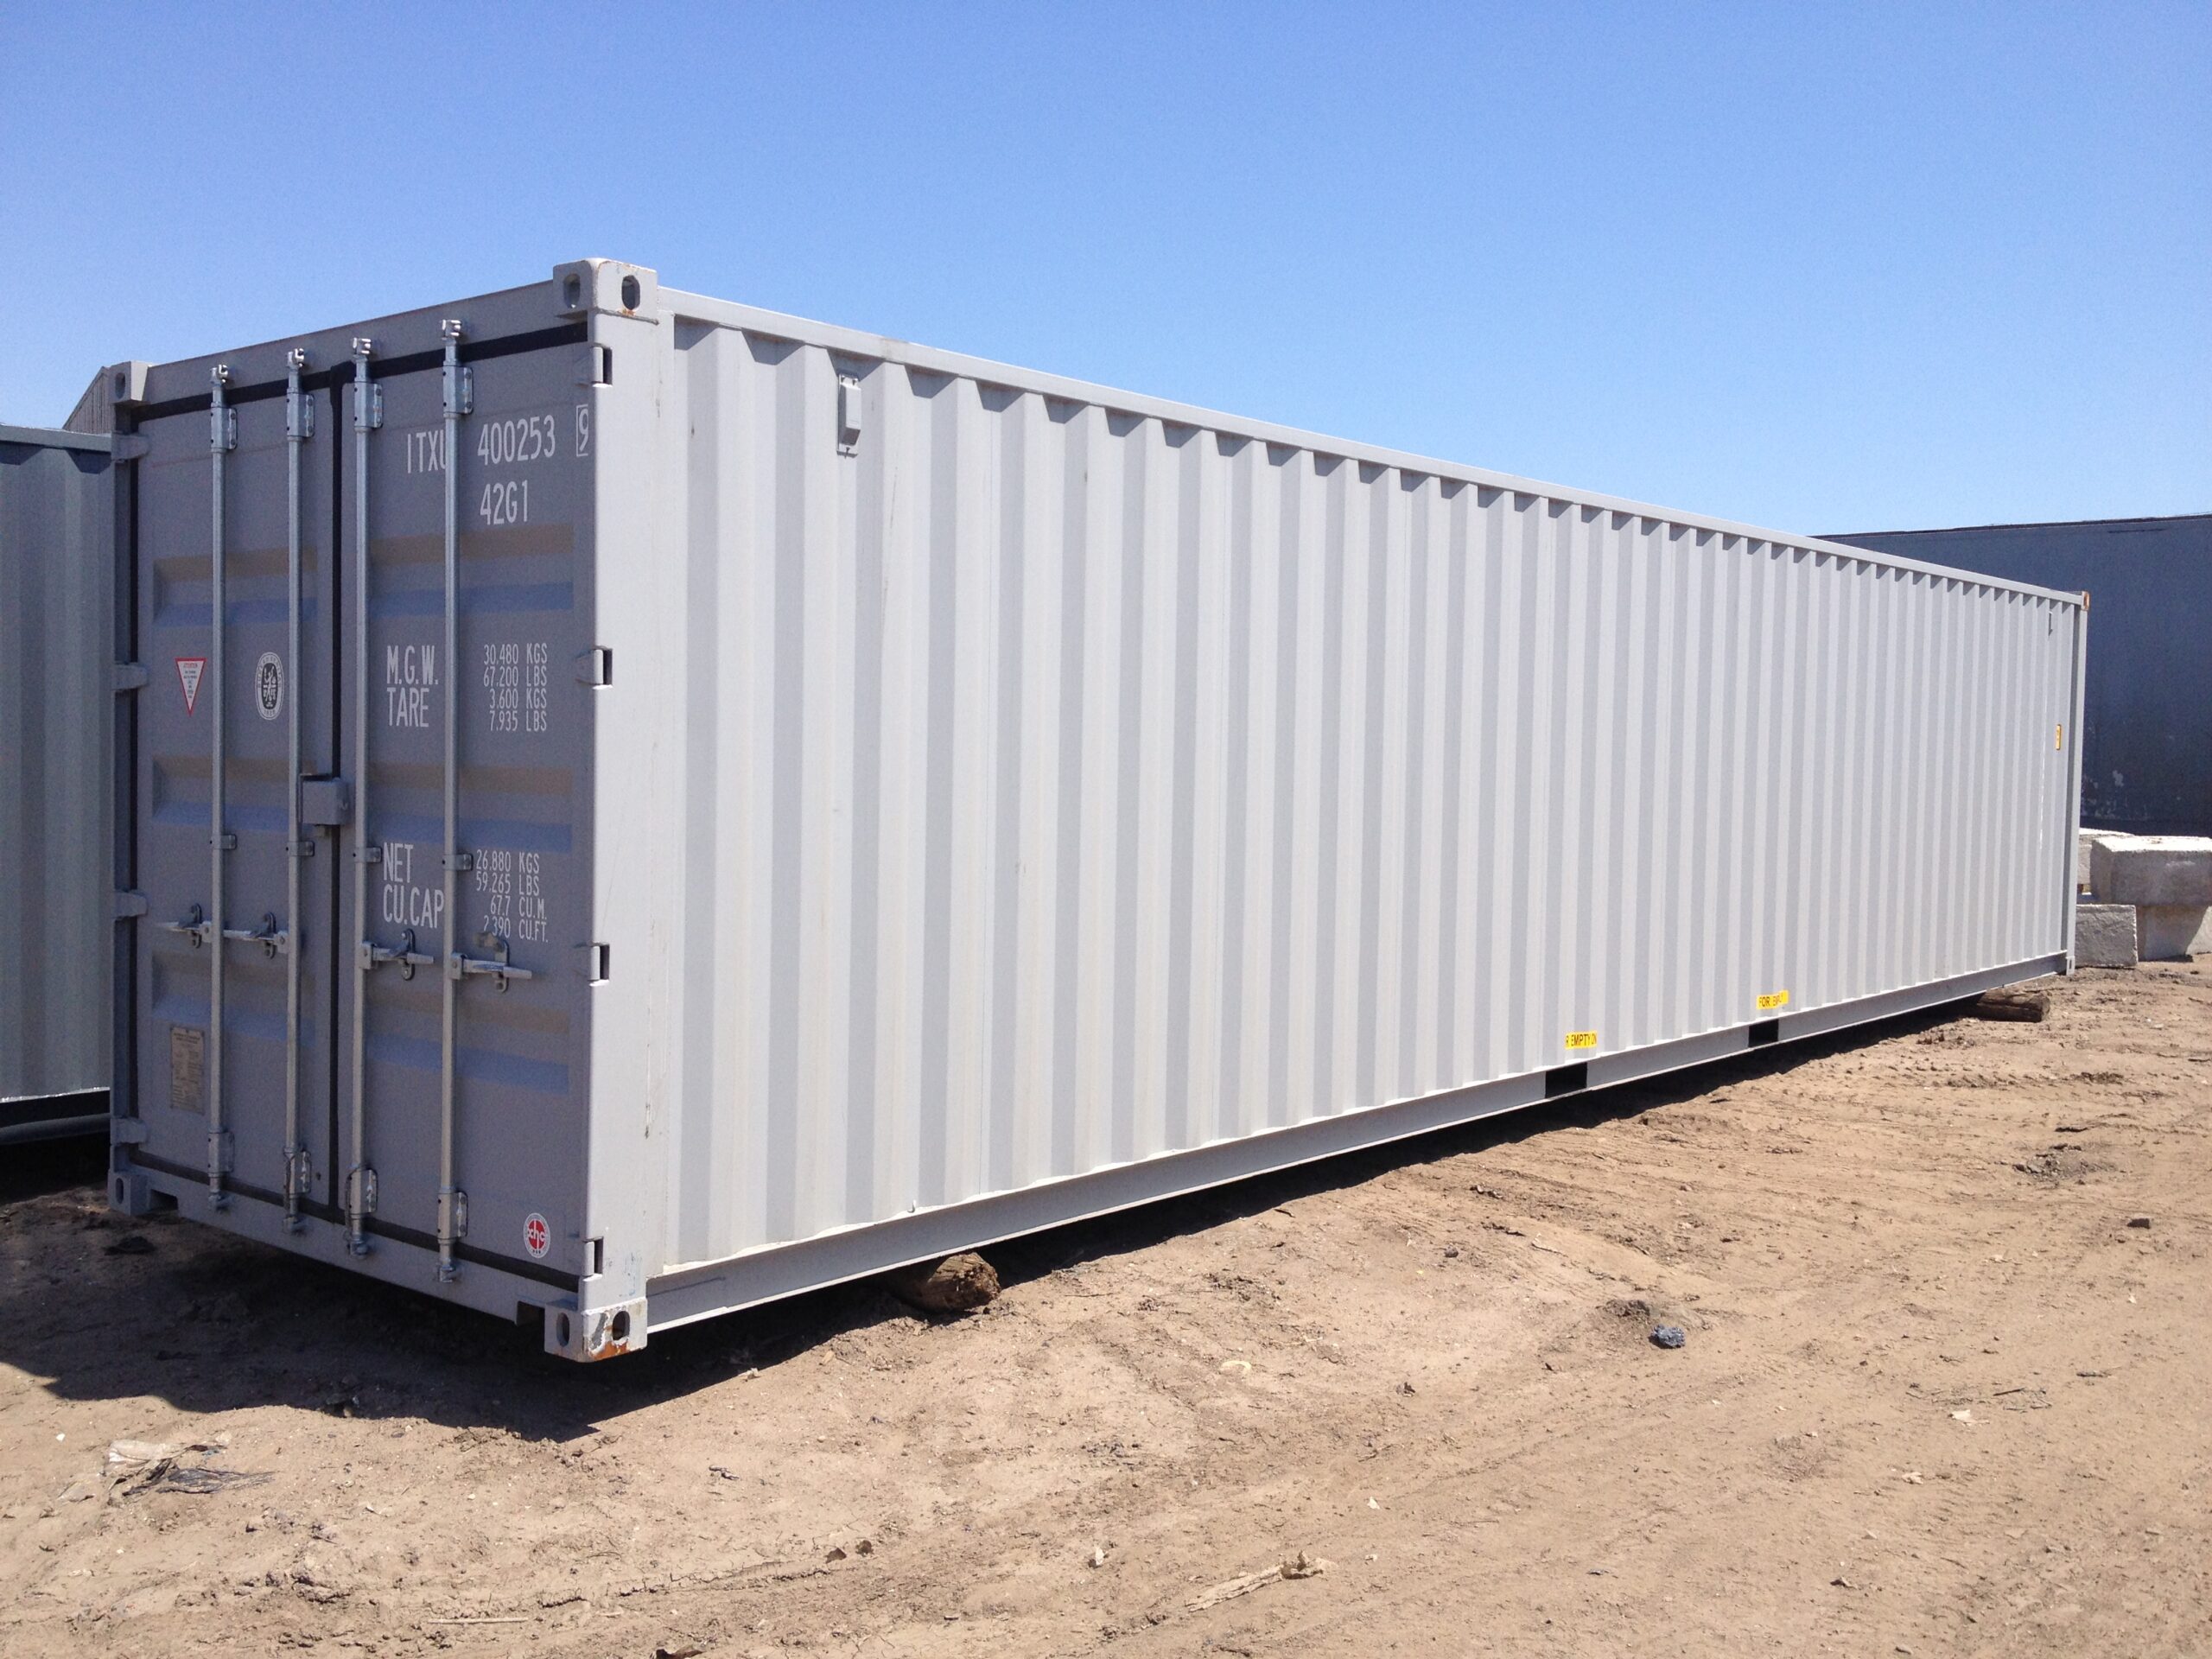 The Storage and Shipping Container Shortage in the U.S.